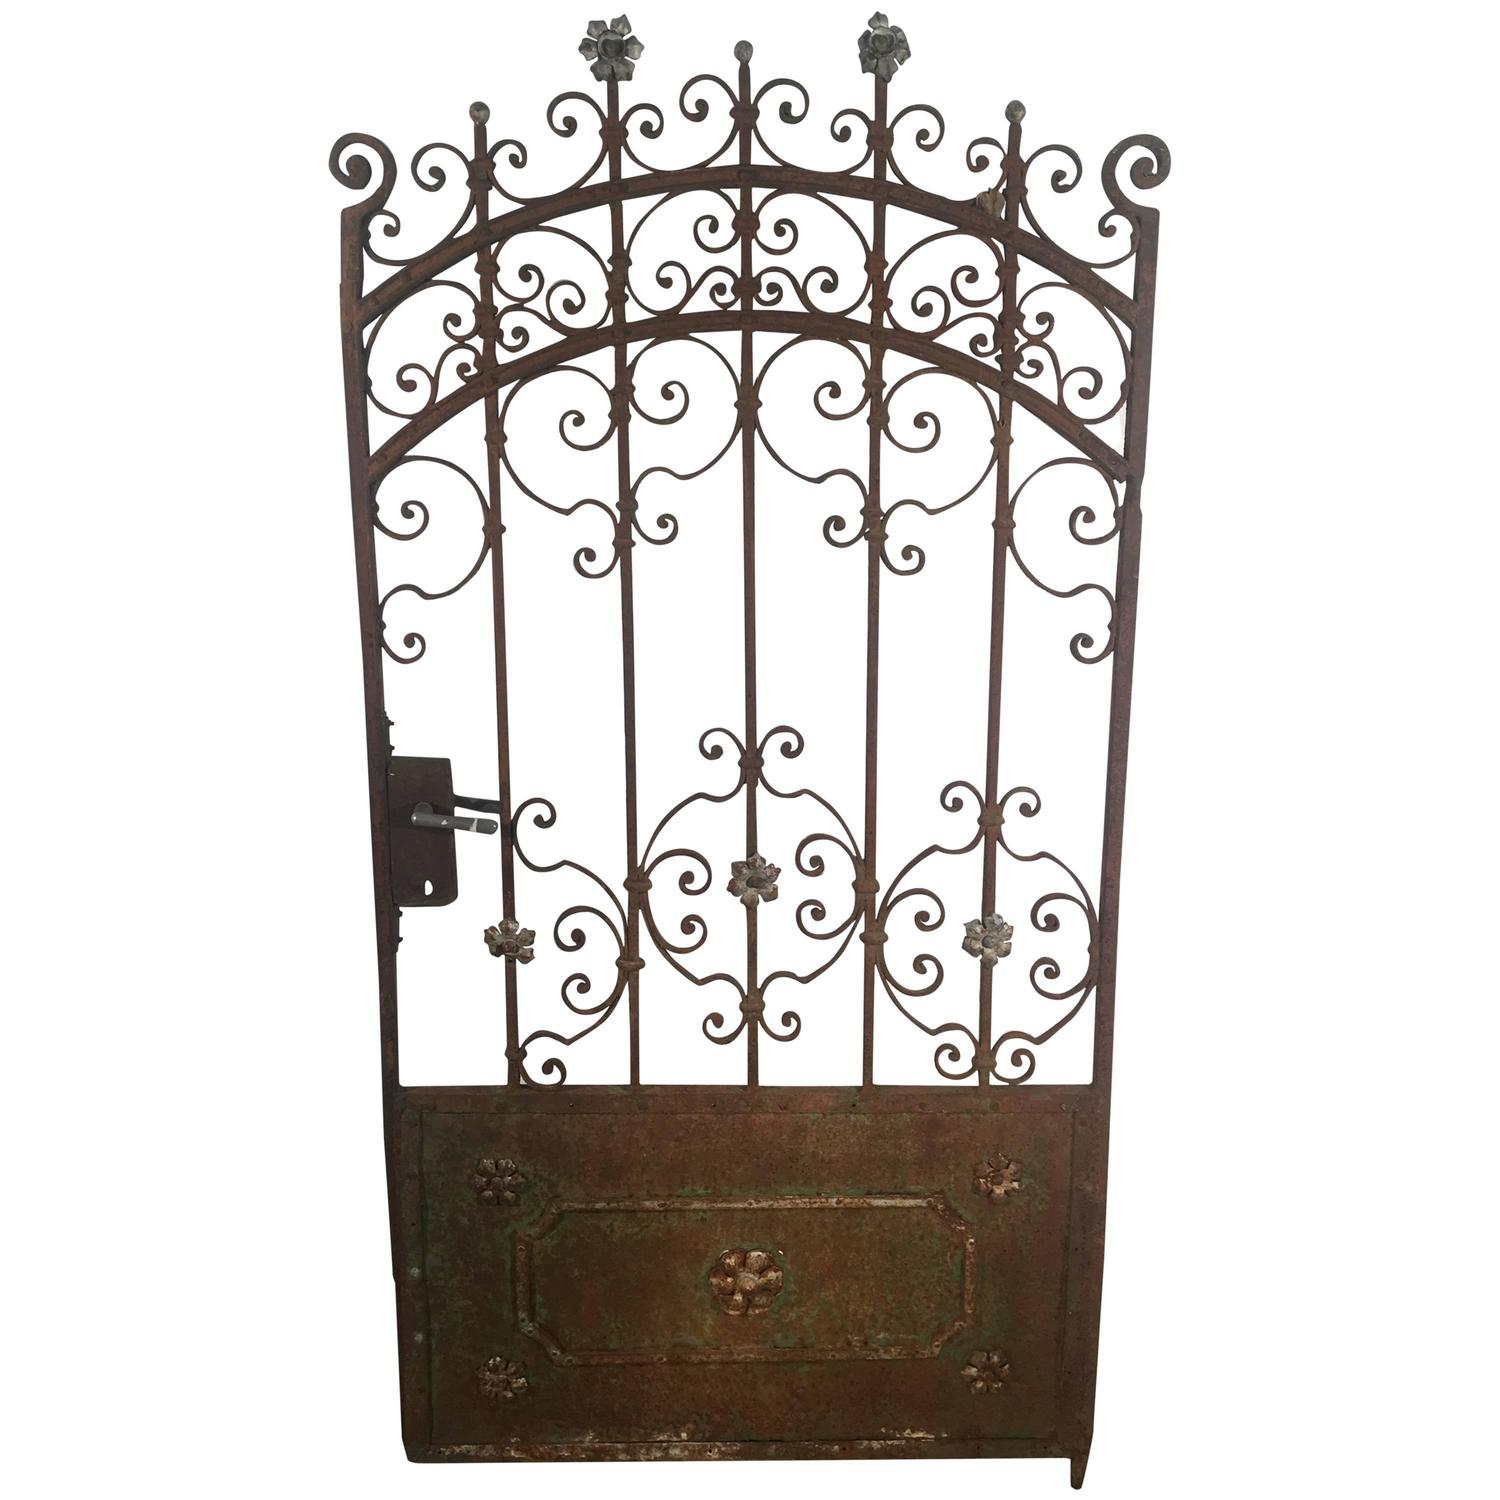 Decorative Iron Gate For Sale at 1stdibs